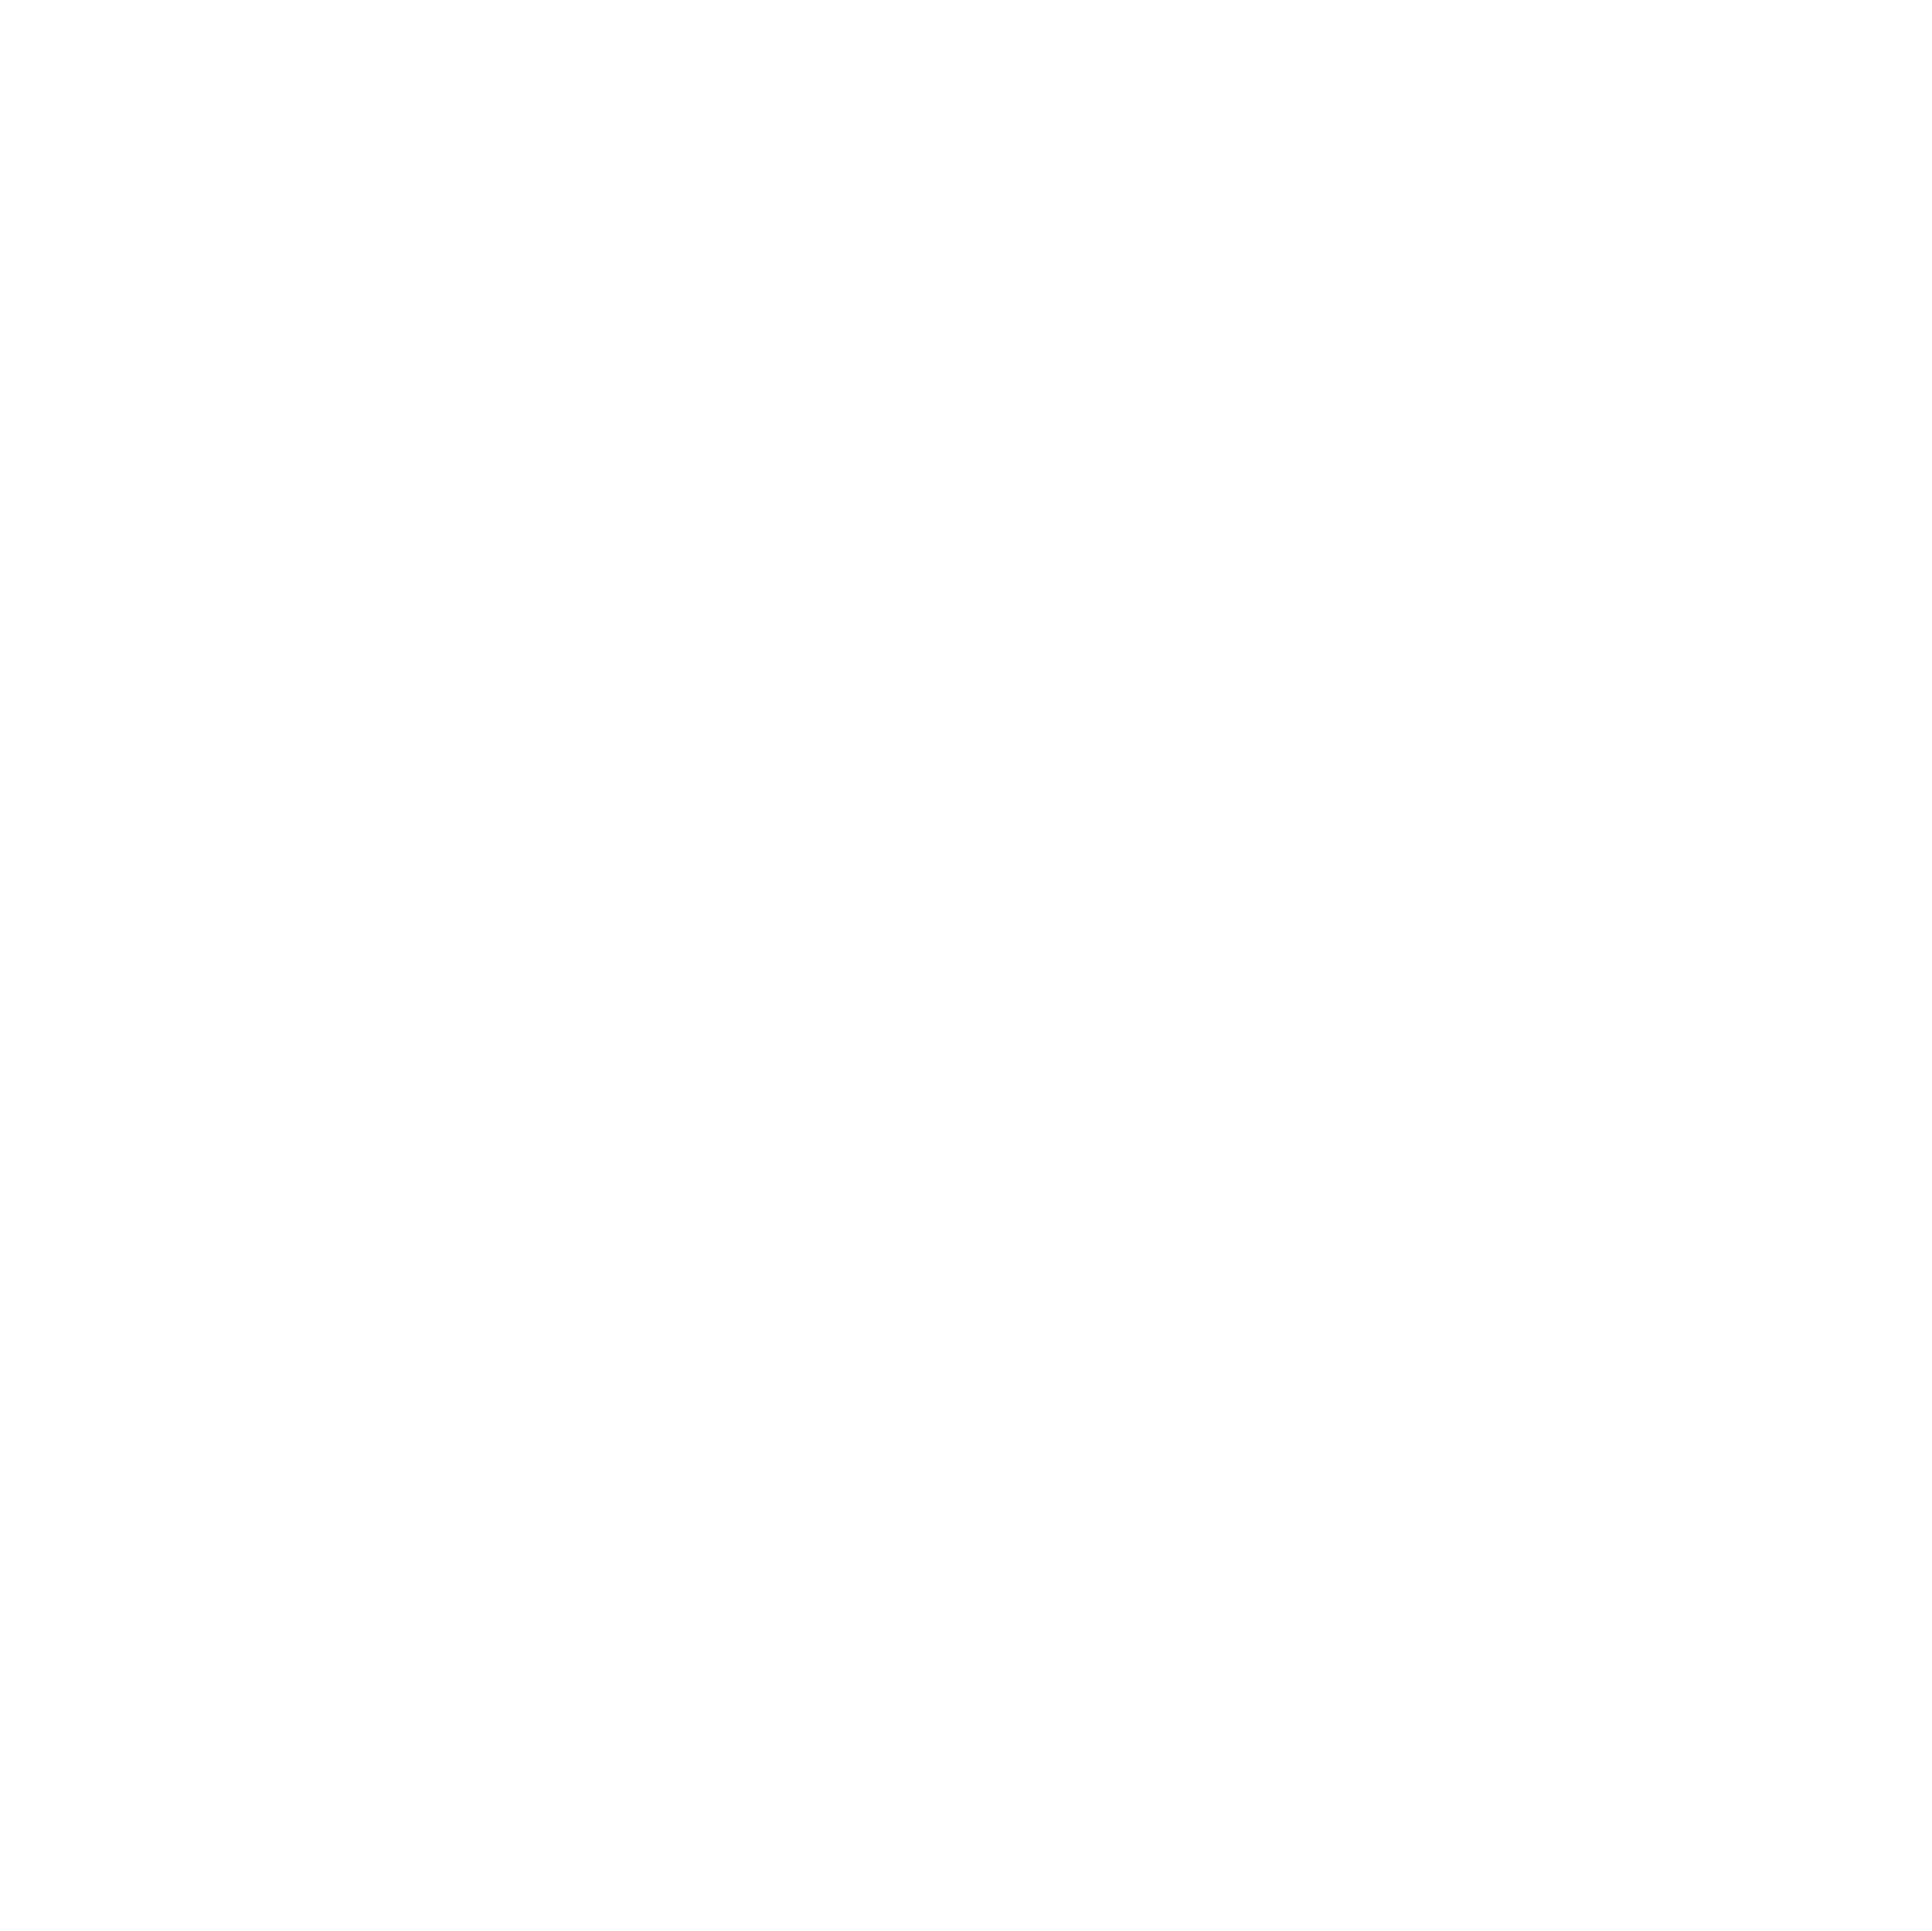 DmcSocialIcons-02-02